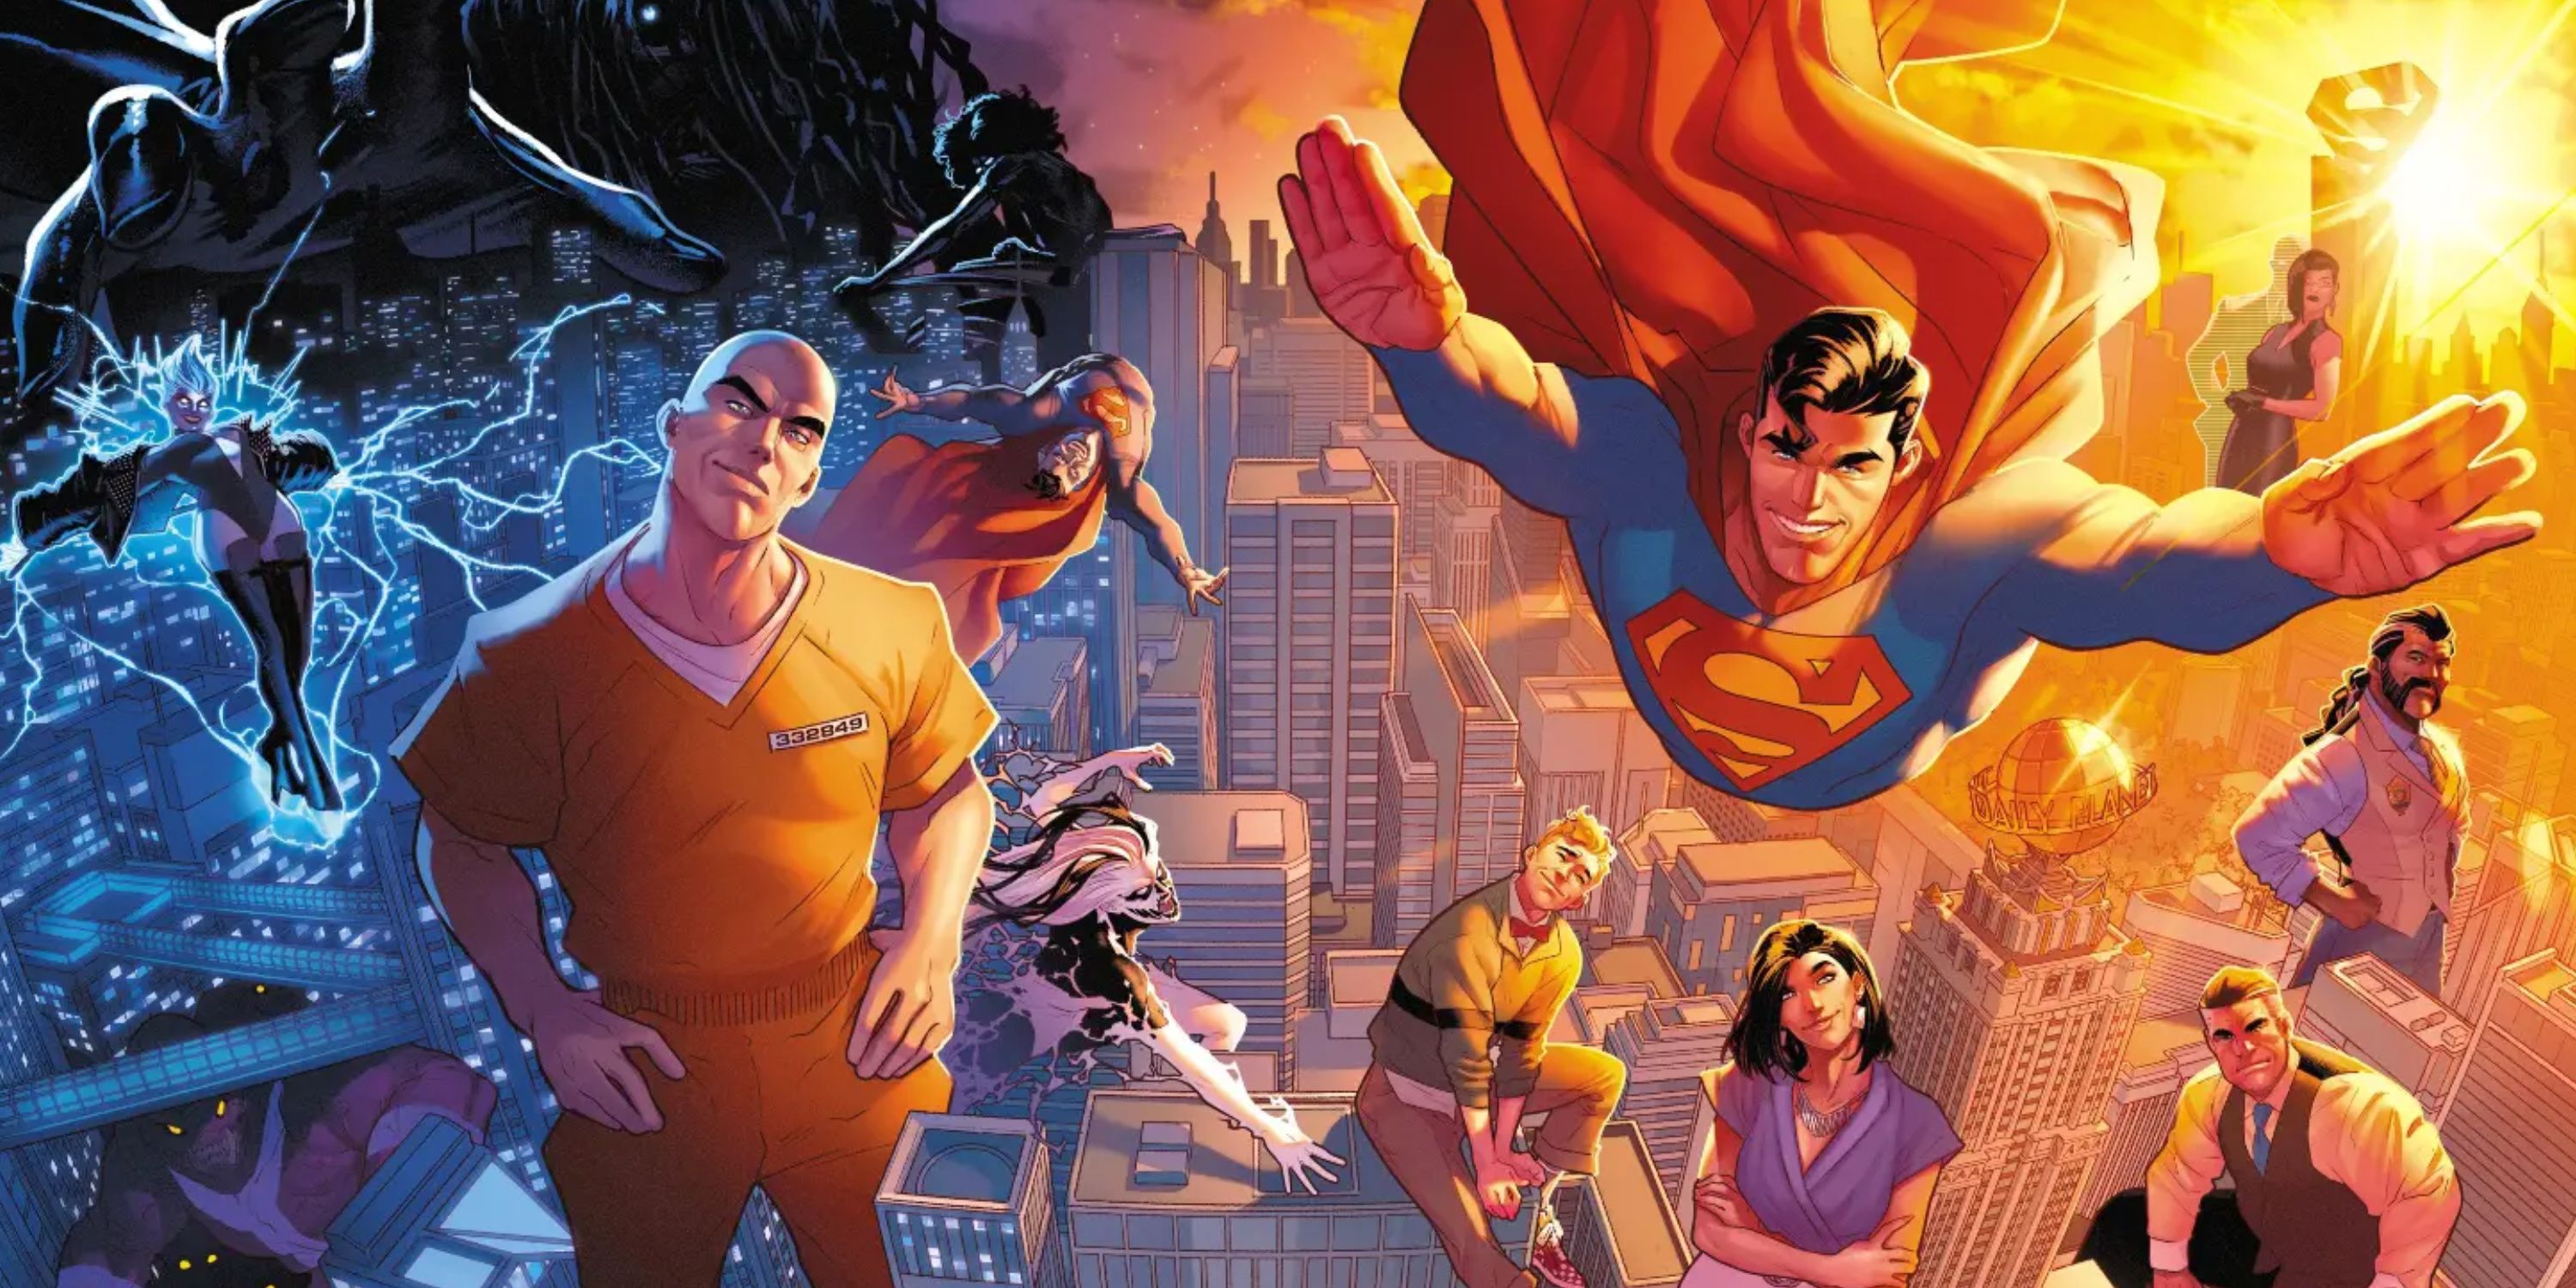 Superman, Lex Luthor, and the rest of Superman's extended cast in DC Comics